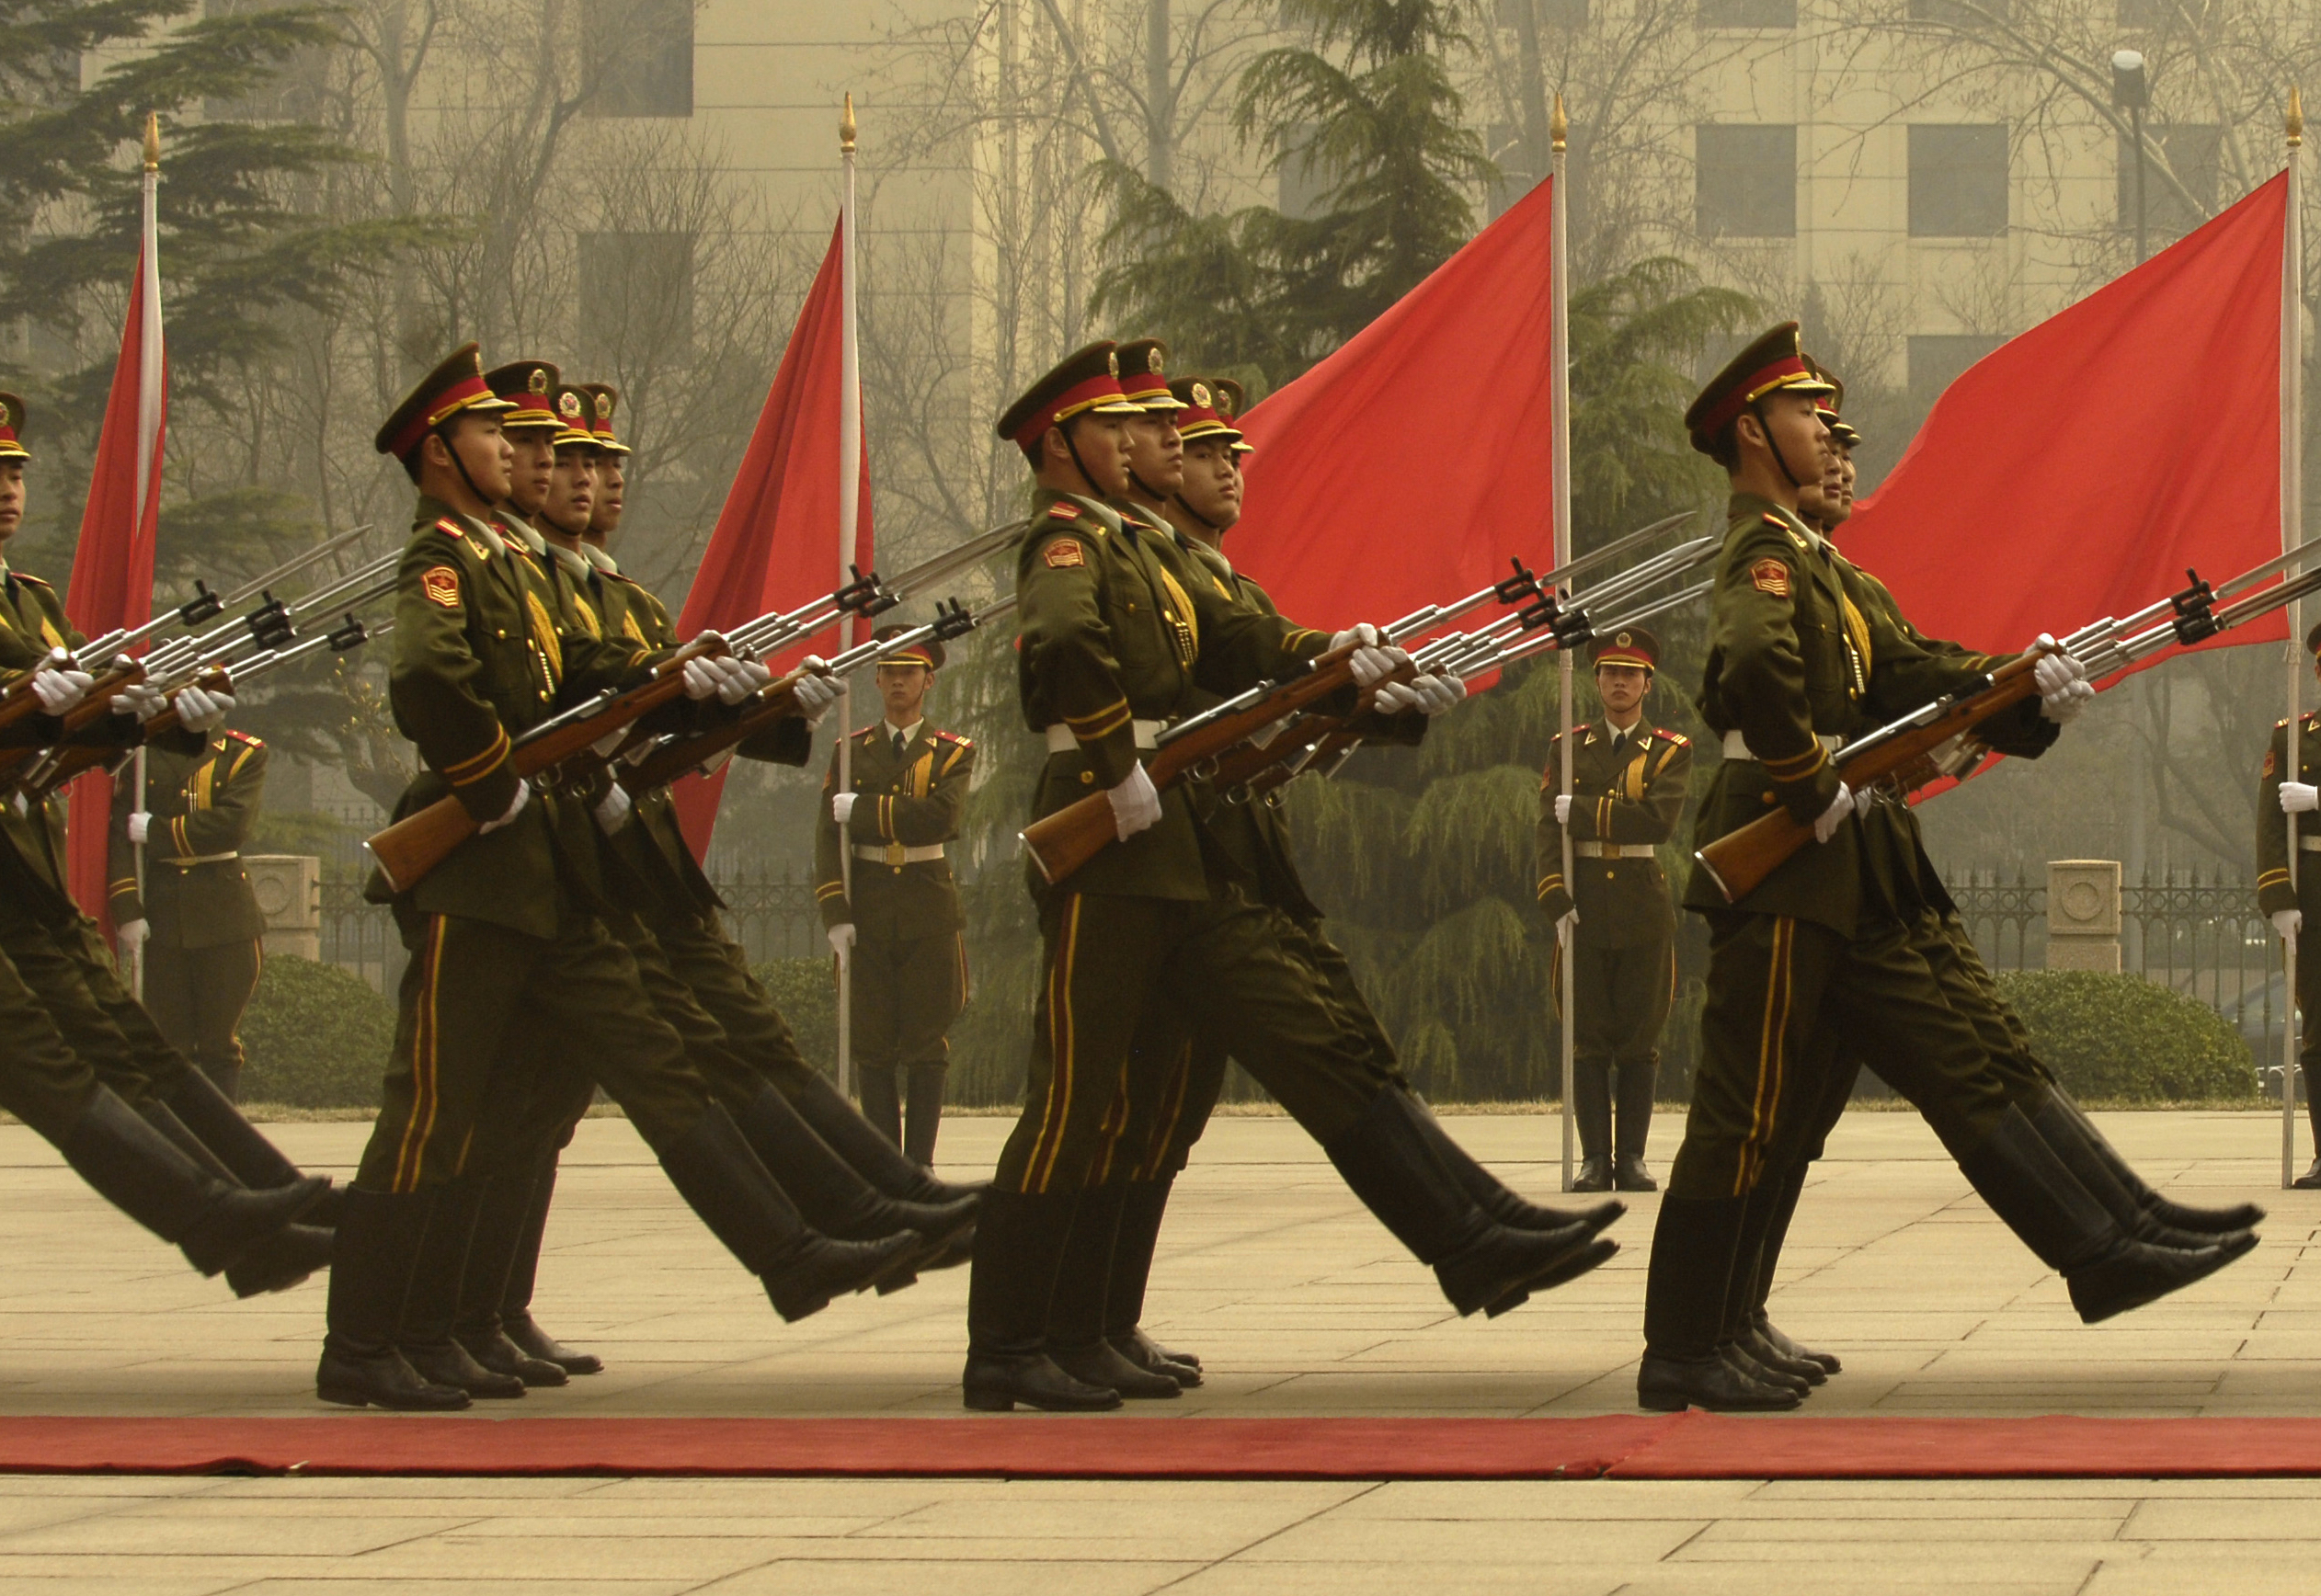 Members of a Chinese military honor guard march during a welcome ceremony for Chairman of the Joint Chiefs of Staff Marine Gen. Peter Pace at the Ministry of Defense in Beijing, China, March 22, 2007. DoD photo by Staff Sgt. D. Myles Cullen. (Released)